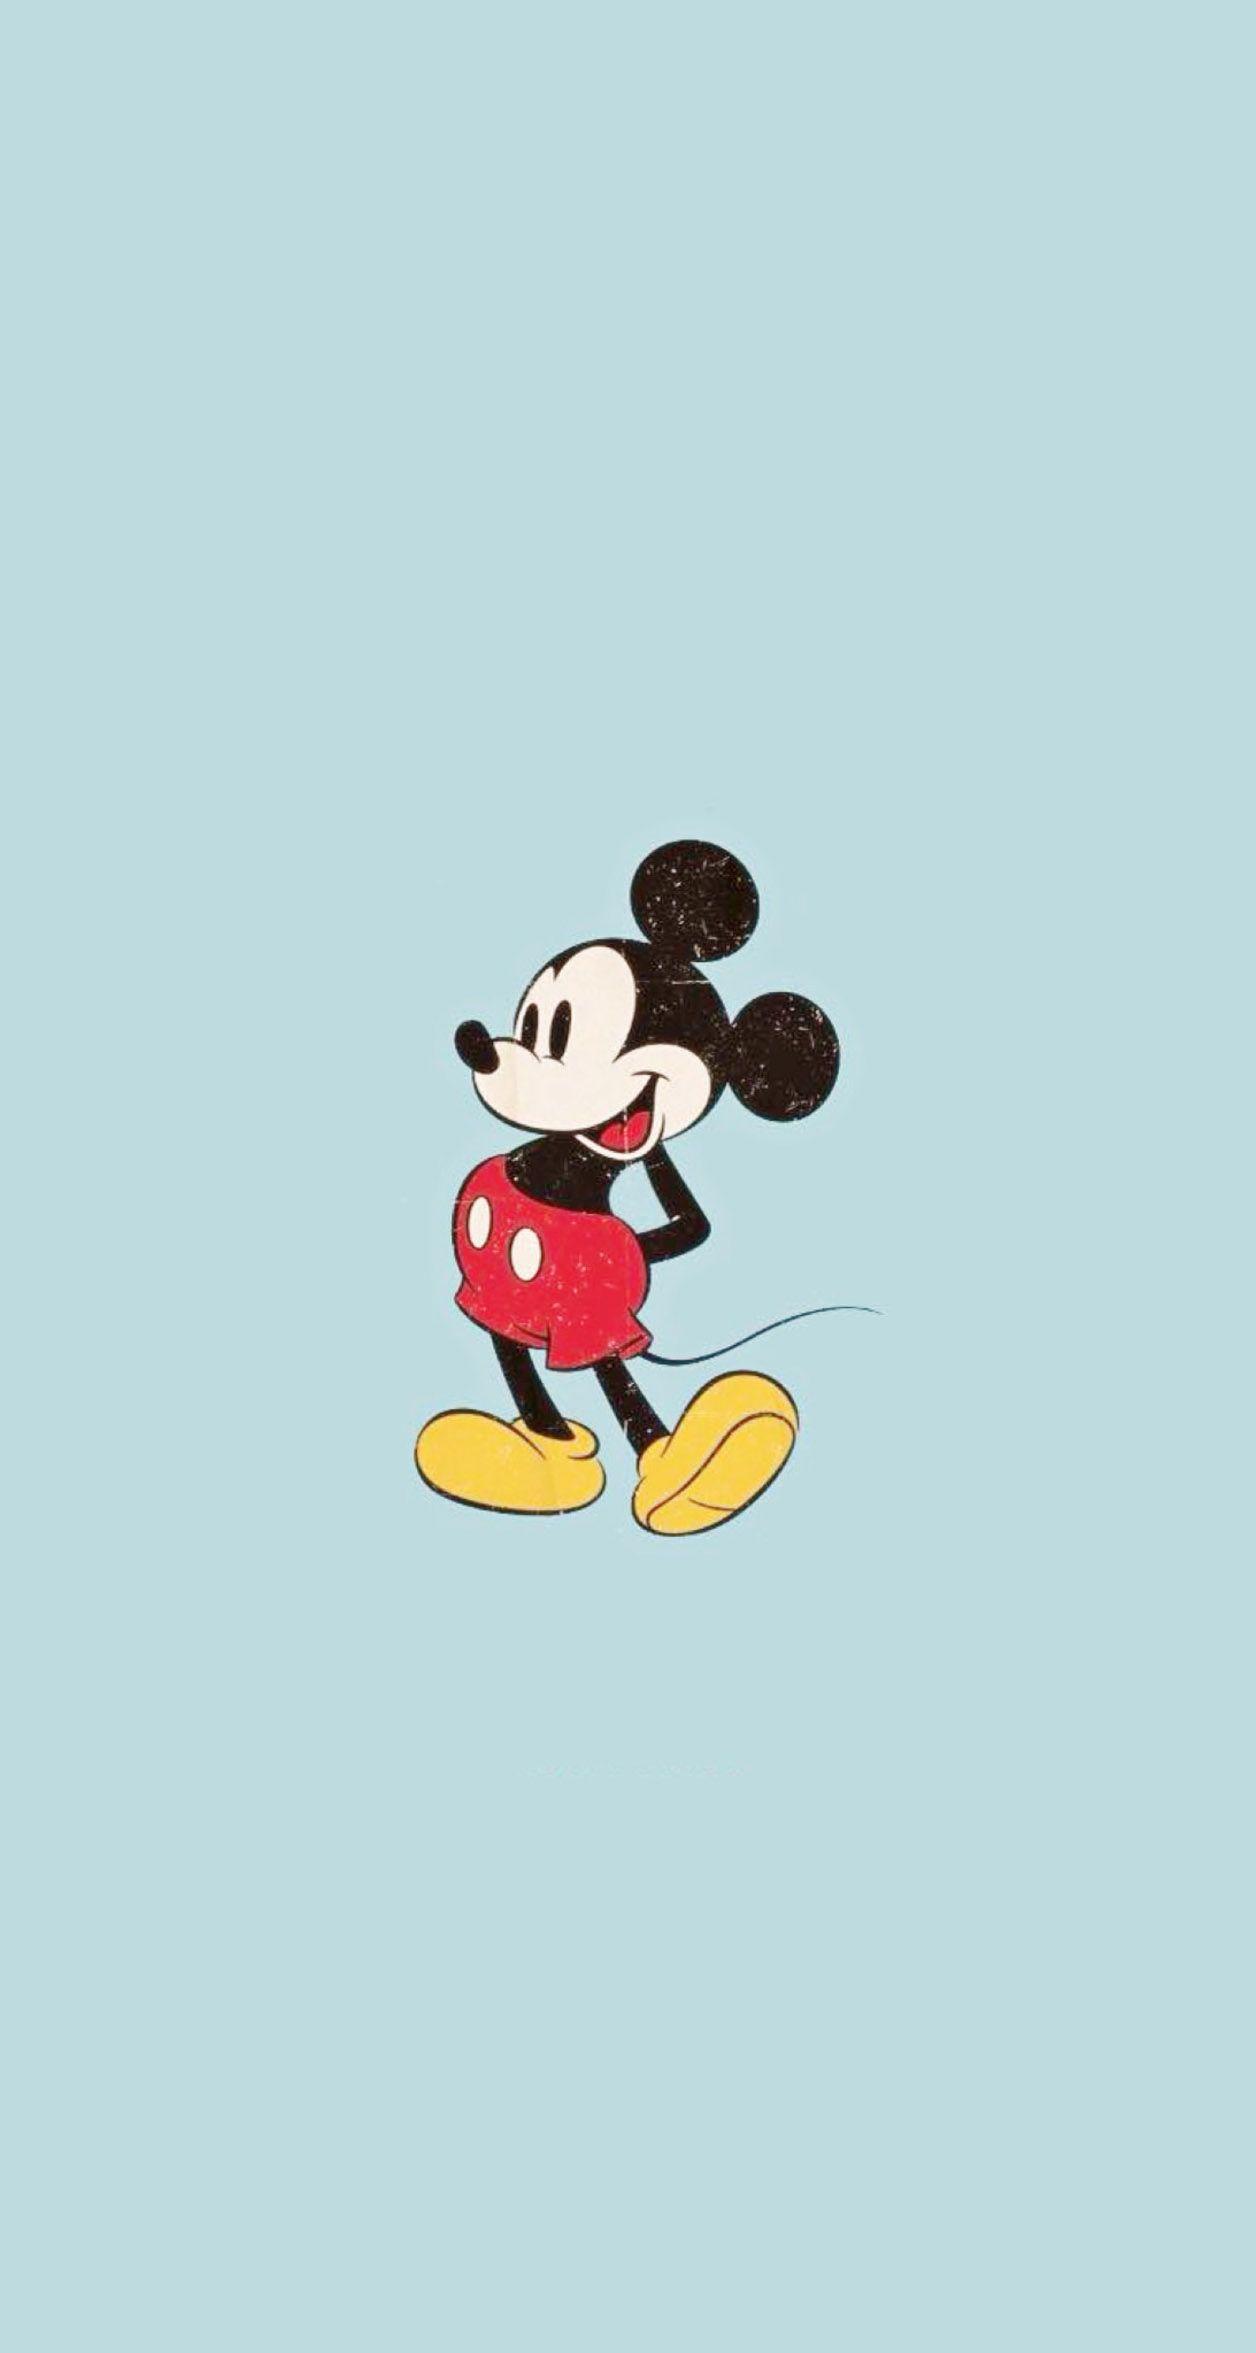 Disney Animation Iphone Wallpapers Wallpaper Cave